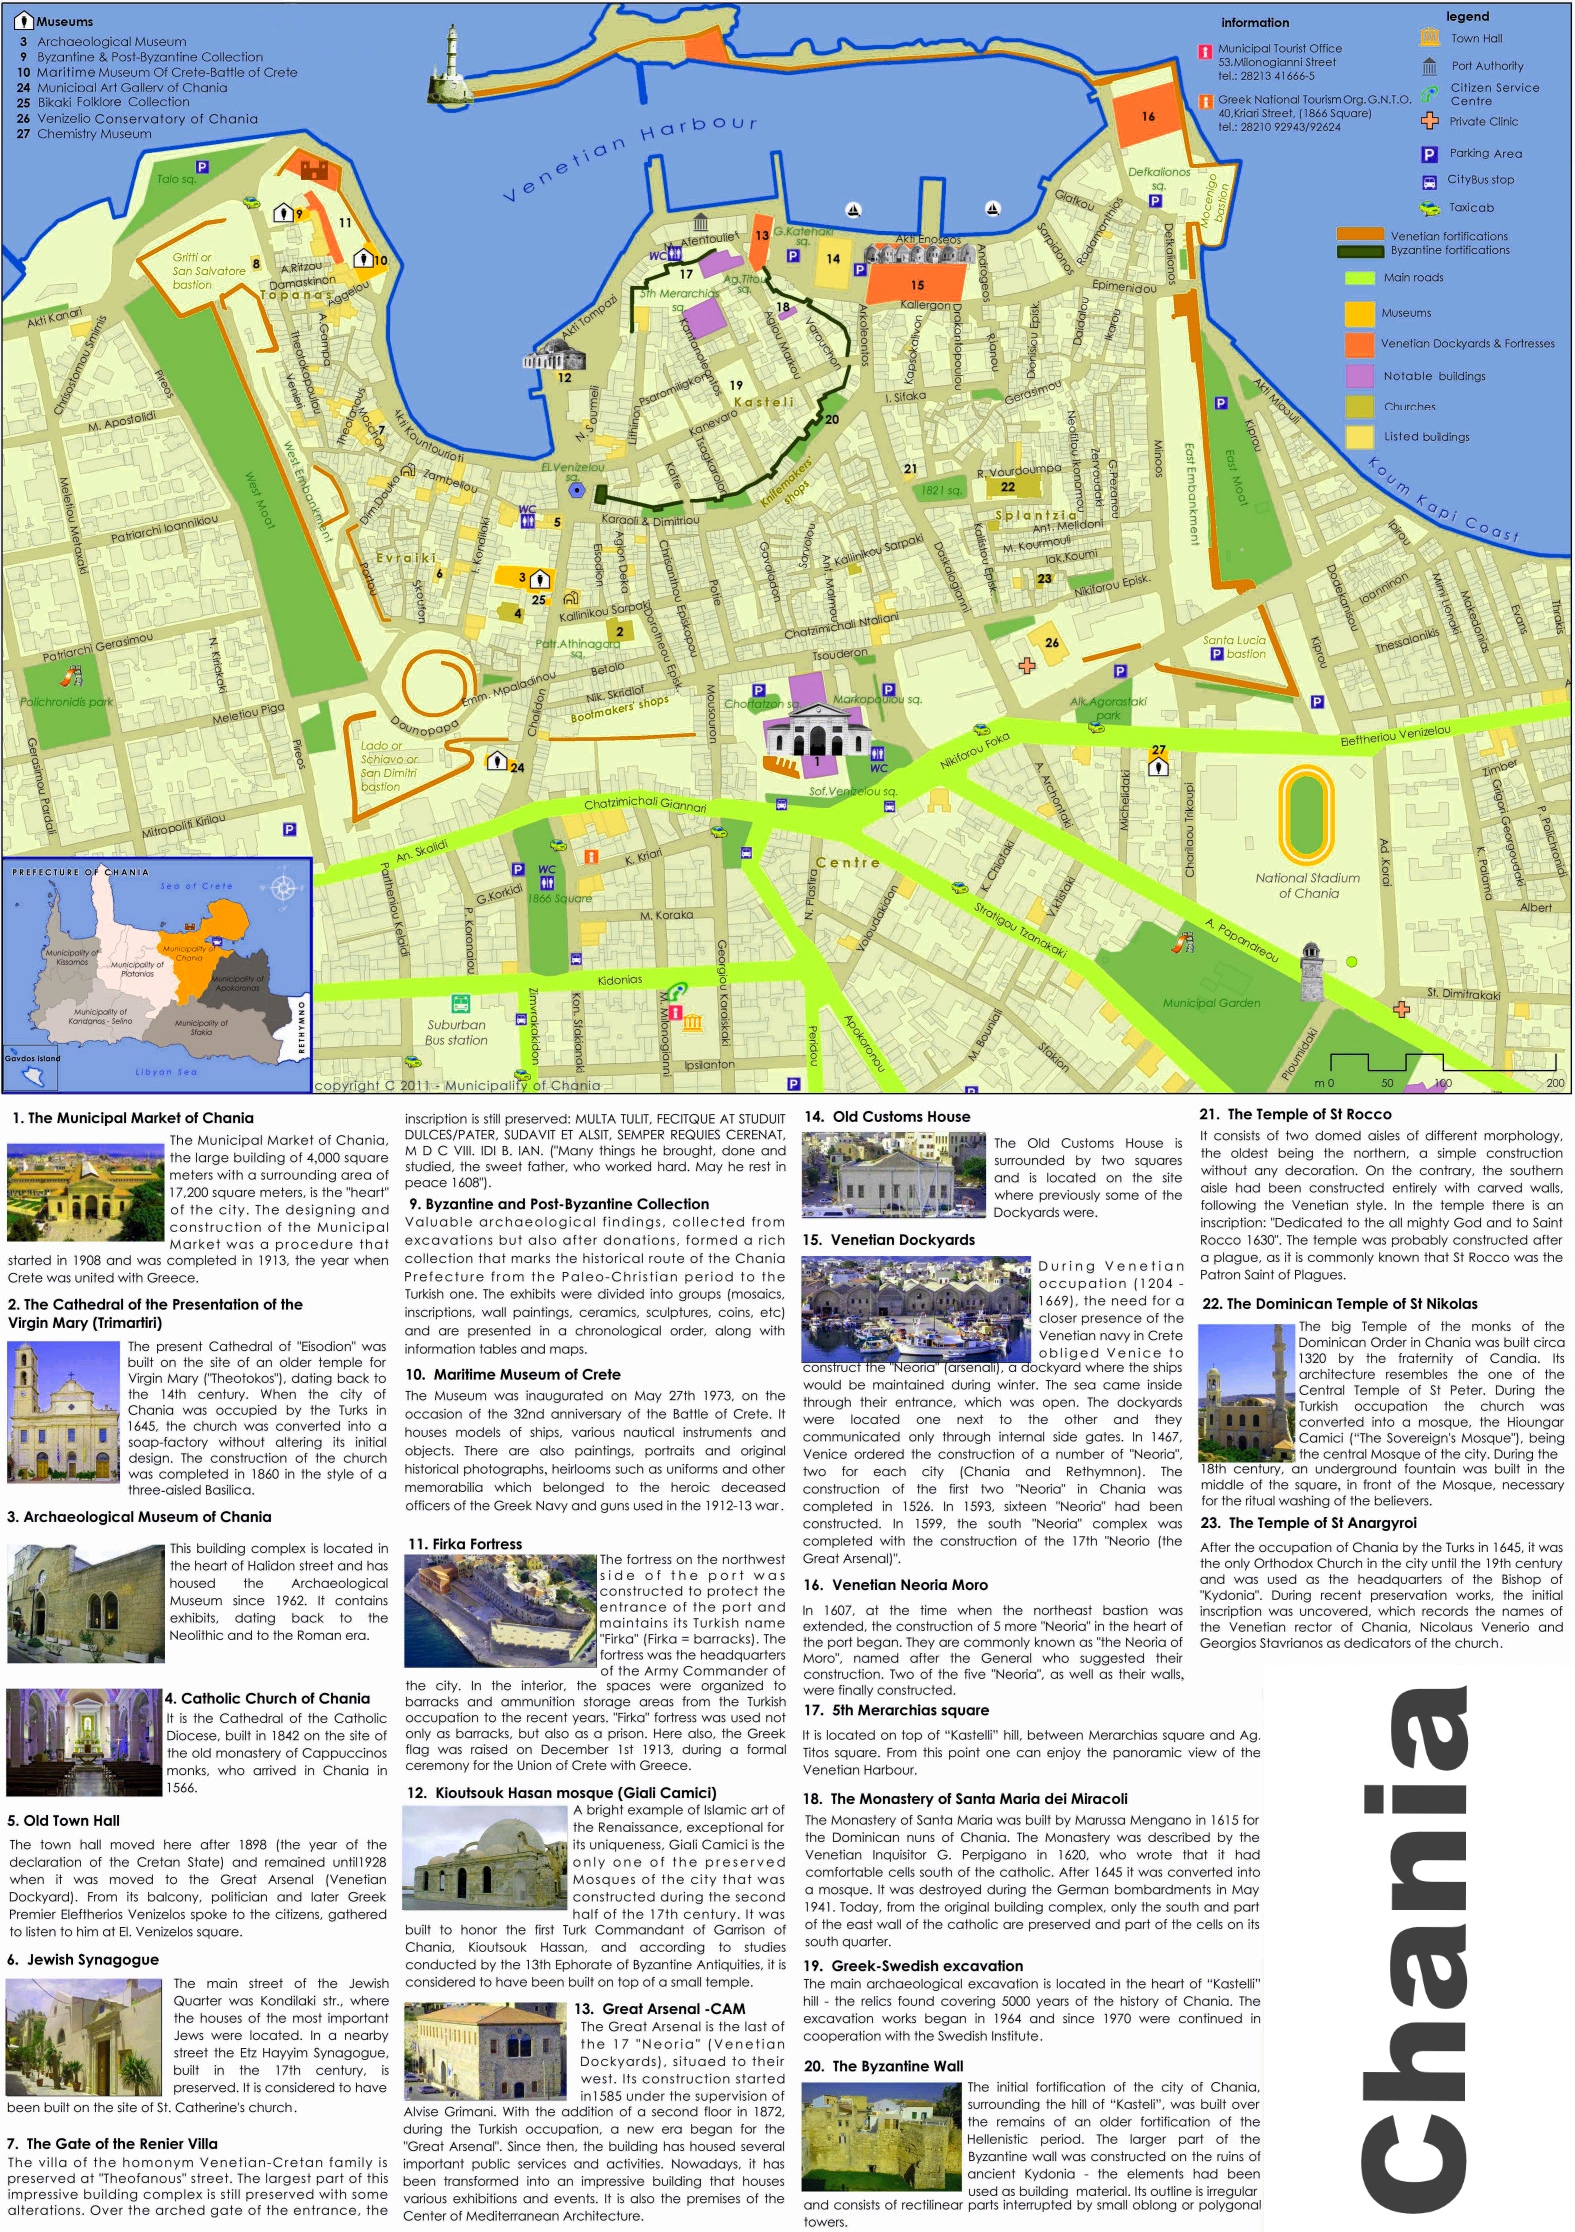 chania-old-town-map.jpg